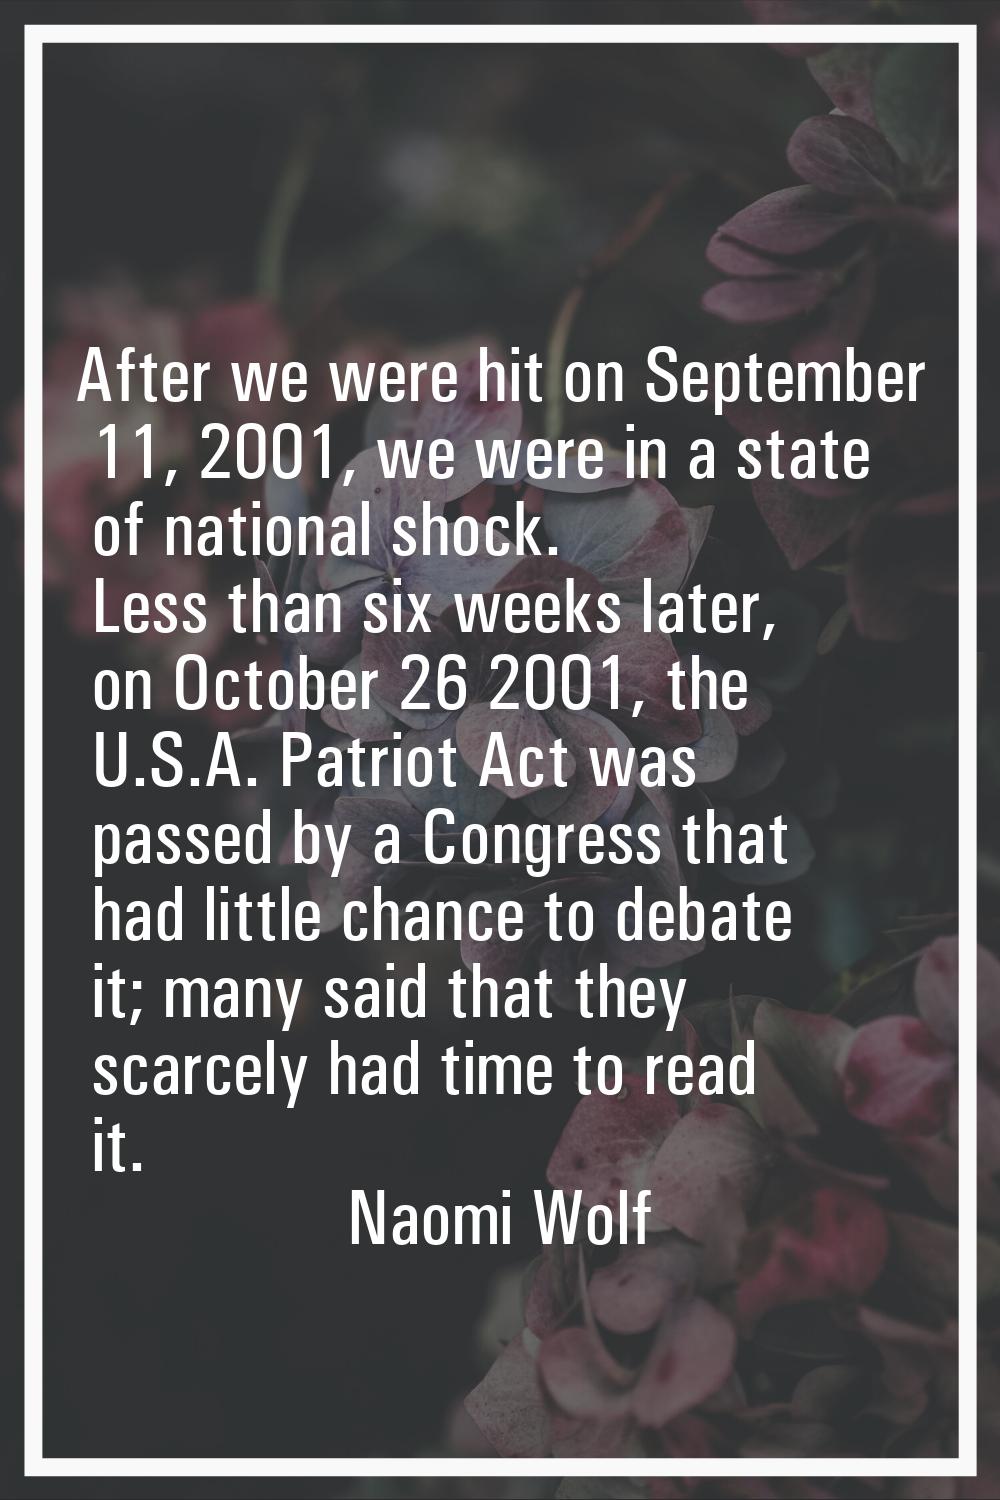 After we were hit on September 11, 2001, we were in a state of national shock. Less than six weeks 